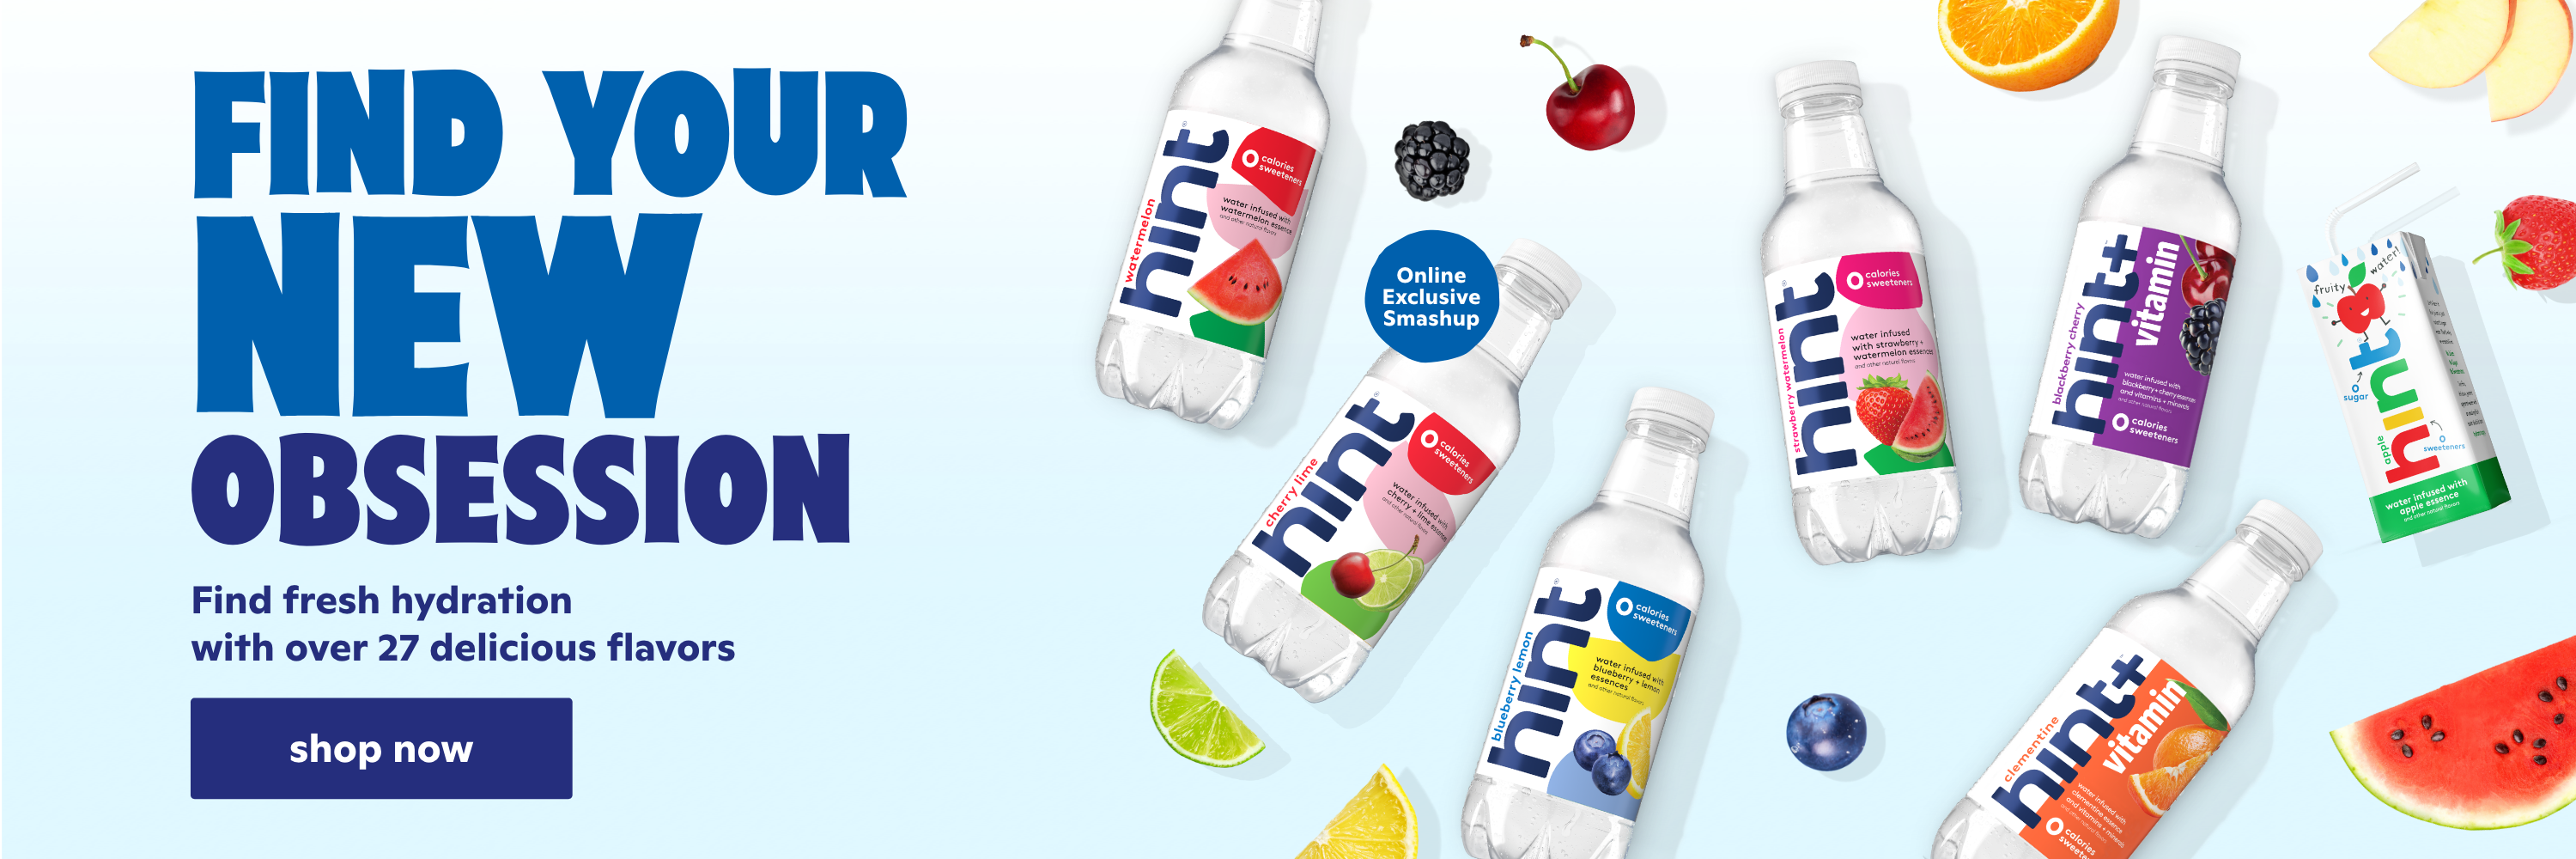 Find you new obsession. Find fresh hydration with over 27 delicious flavors Shop now.